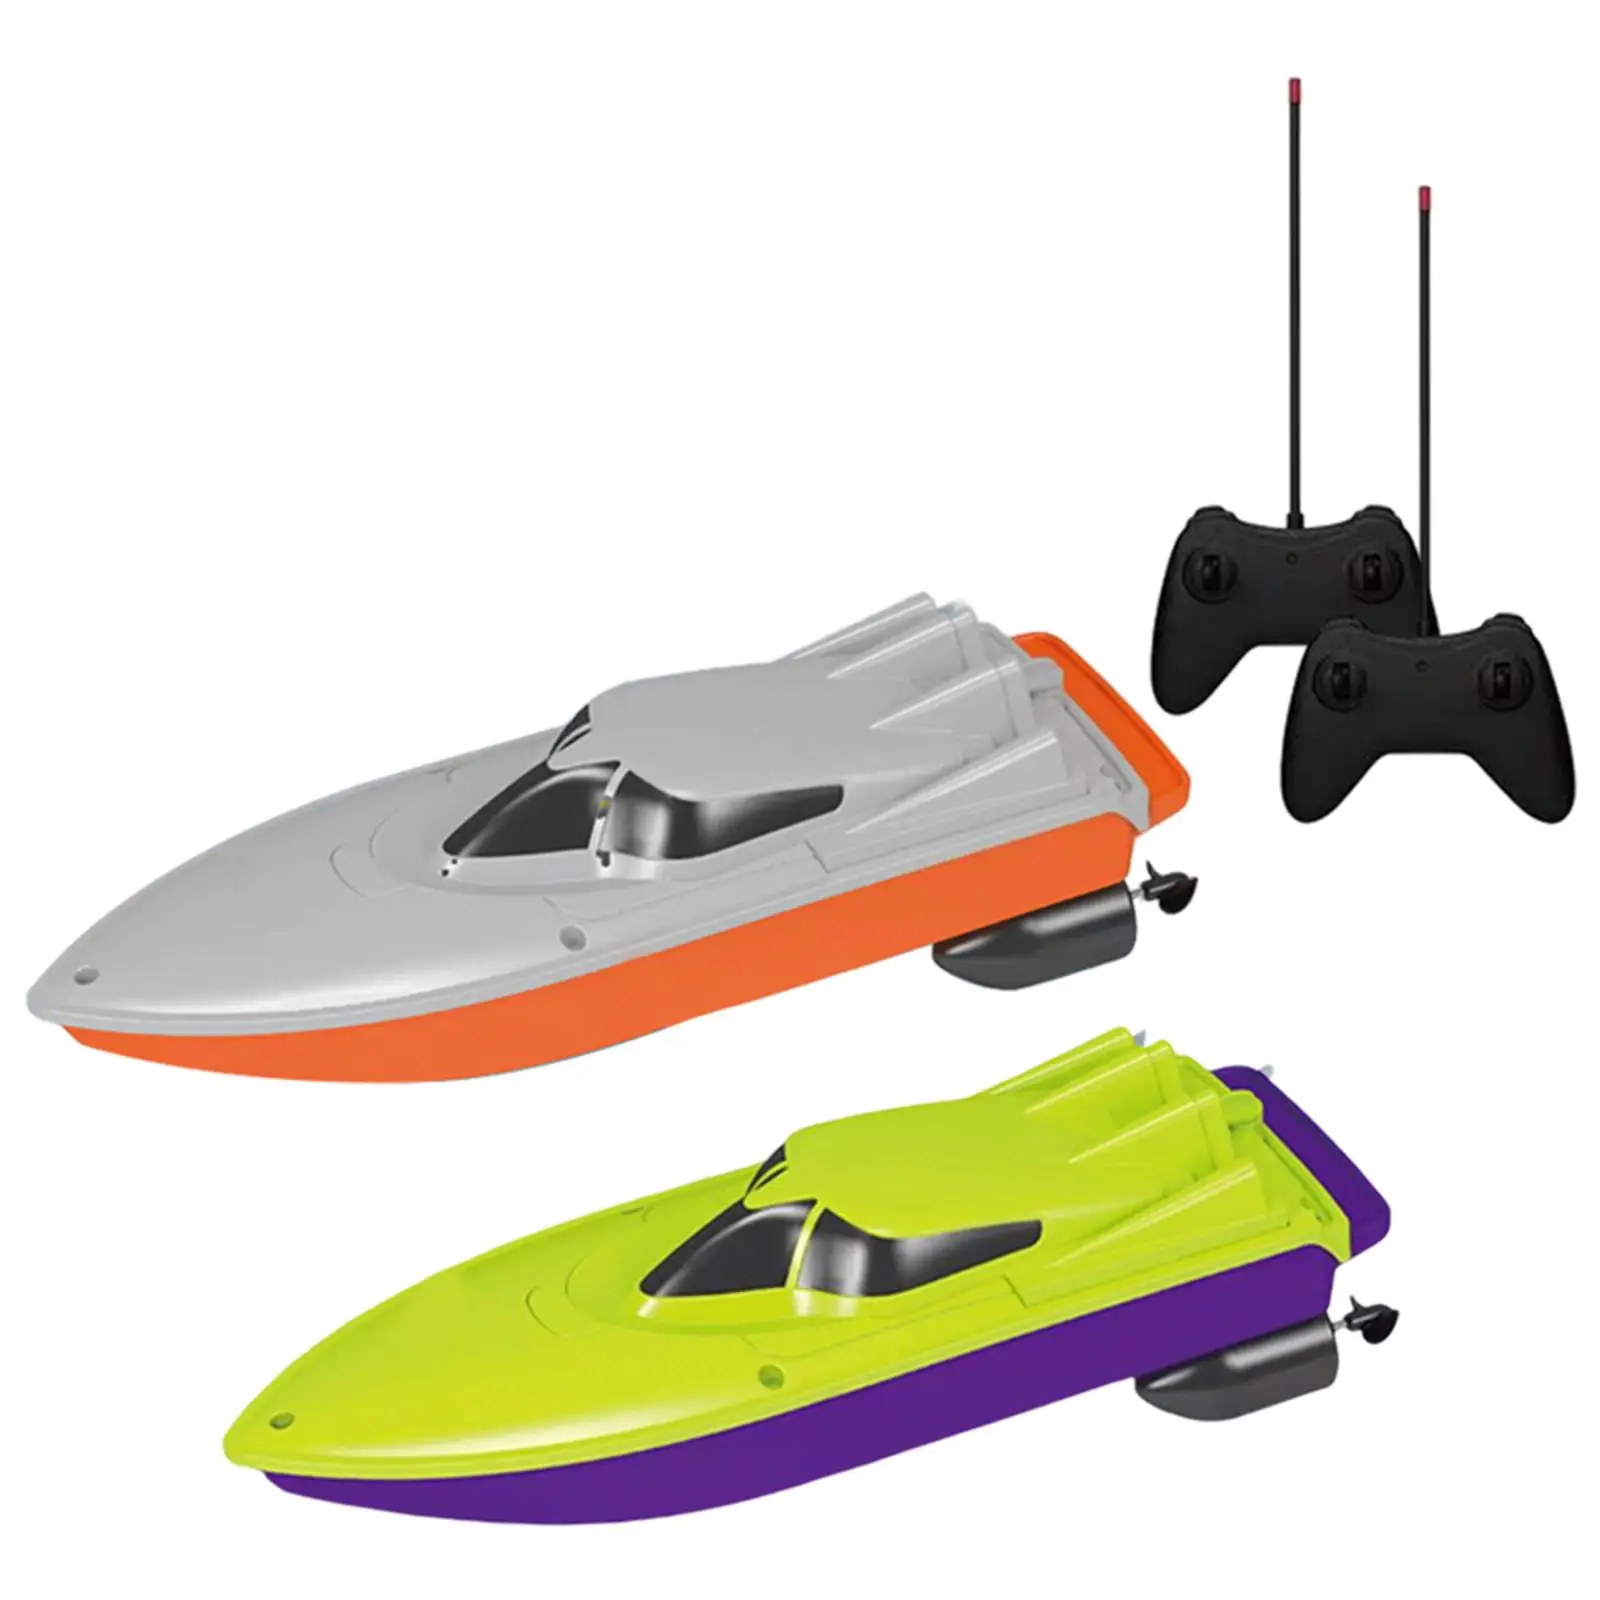 RC Boat Double Motor High RC Race Boat 10km/H for River, Pools,